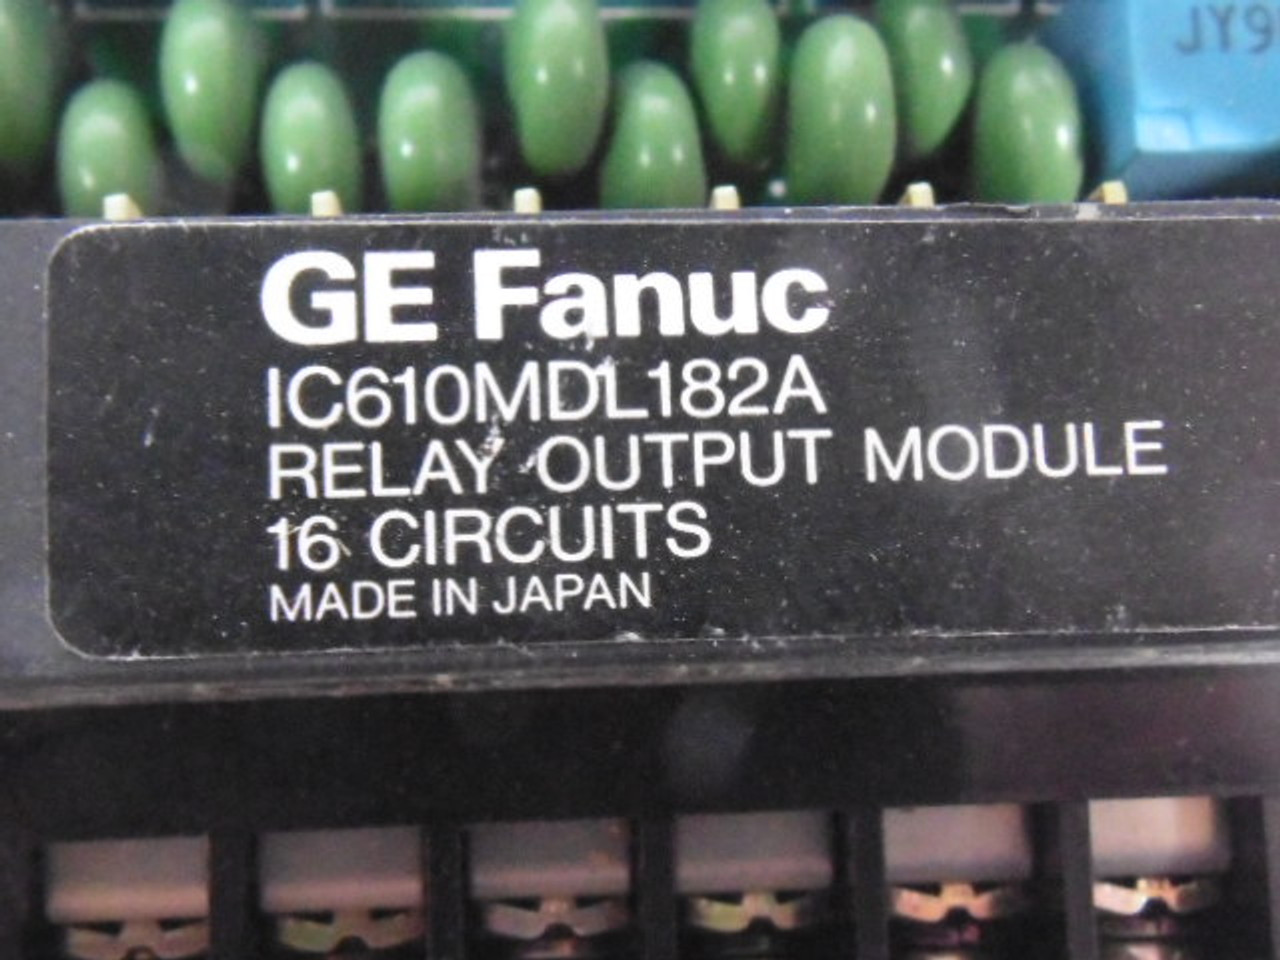 GE Fanuc IC610MDL182A Relay Output Module 16 Circuits USED